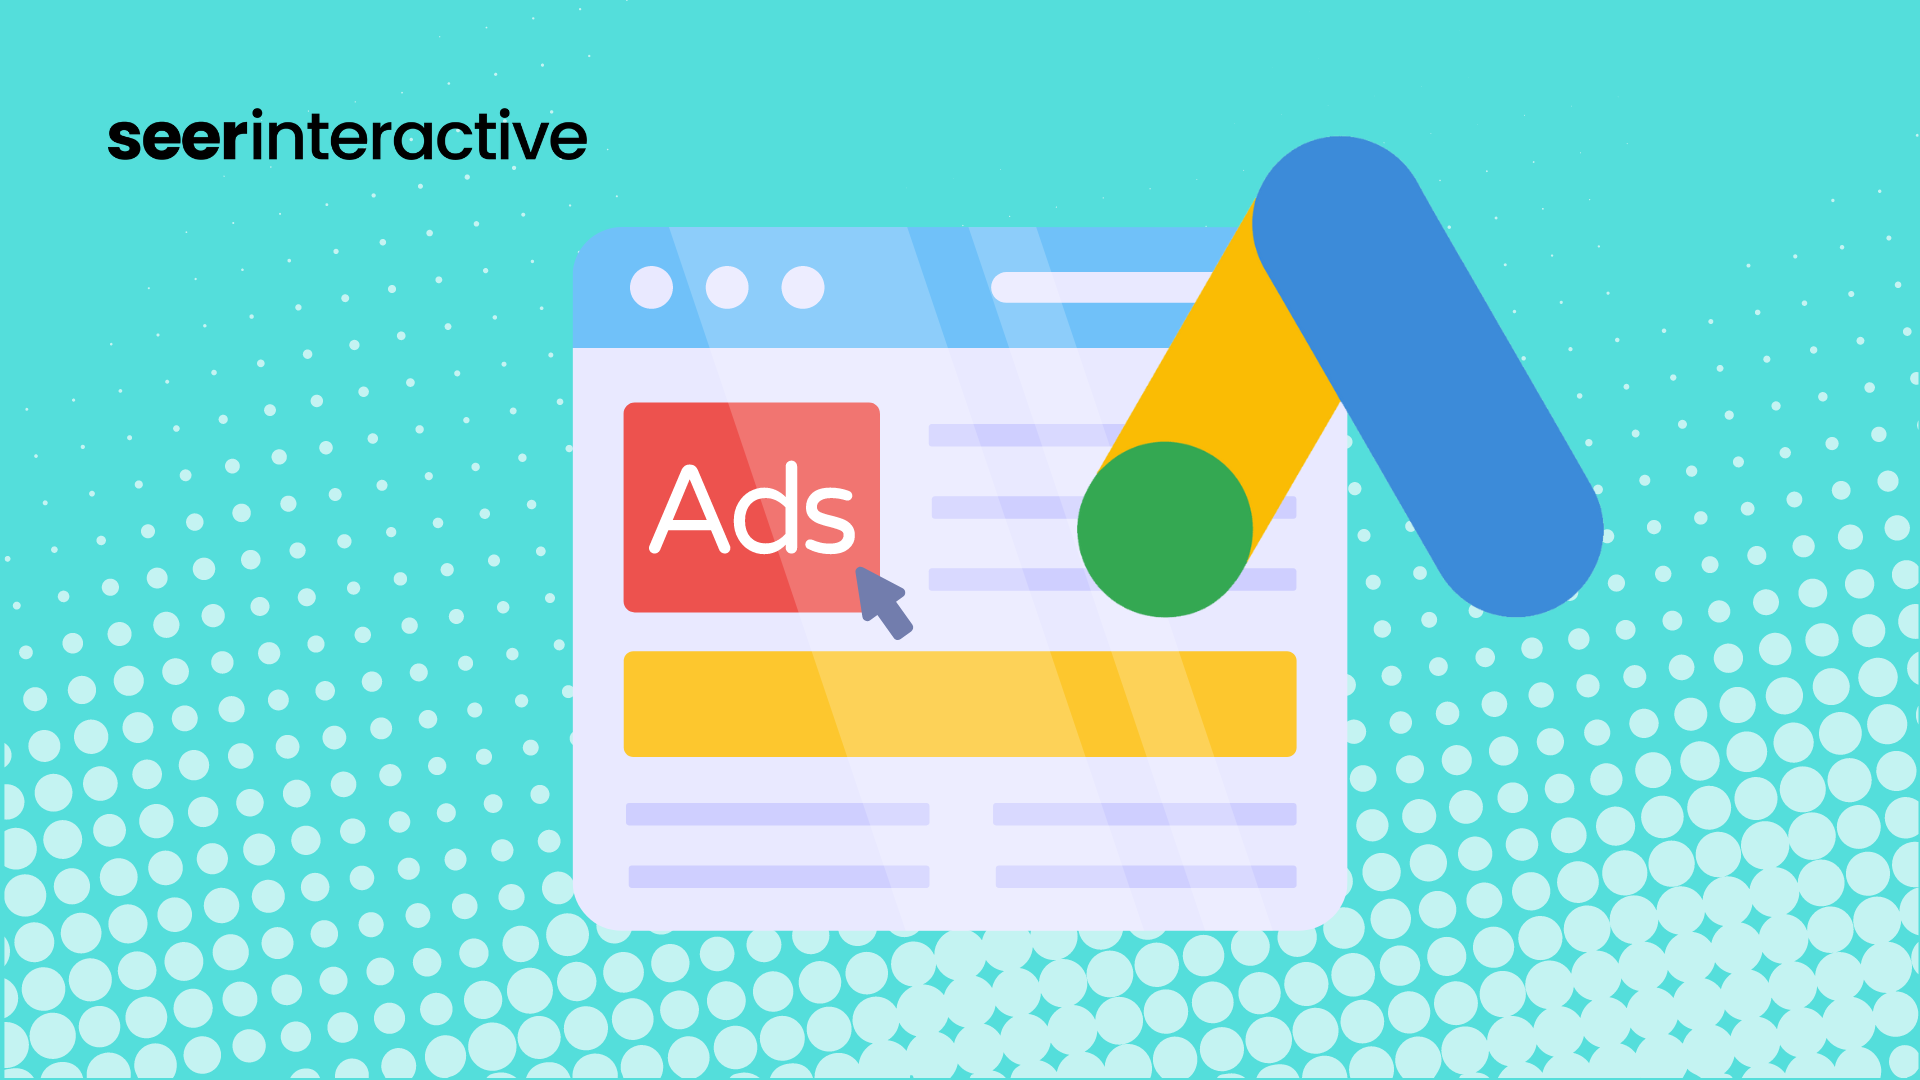 You Should Maximize Your Responsive Search Ads Assets - Here’s Why